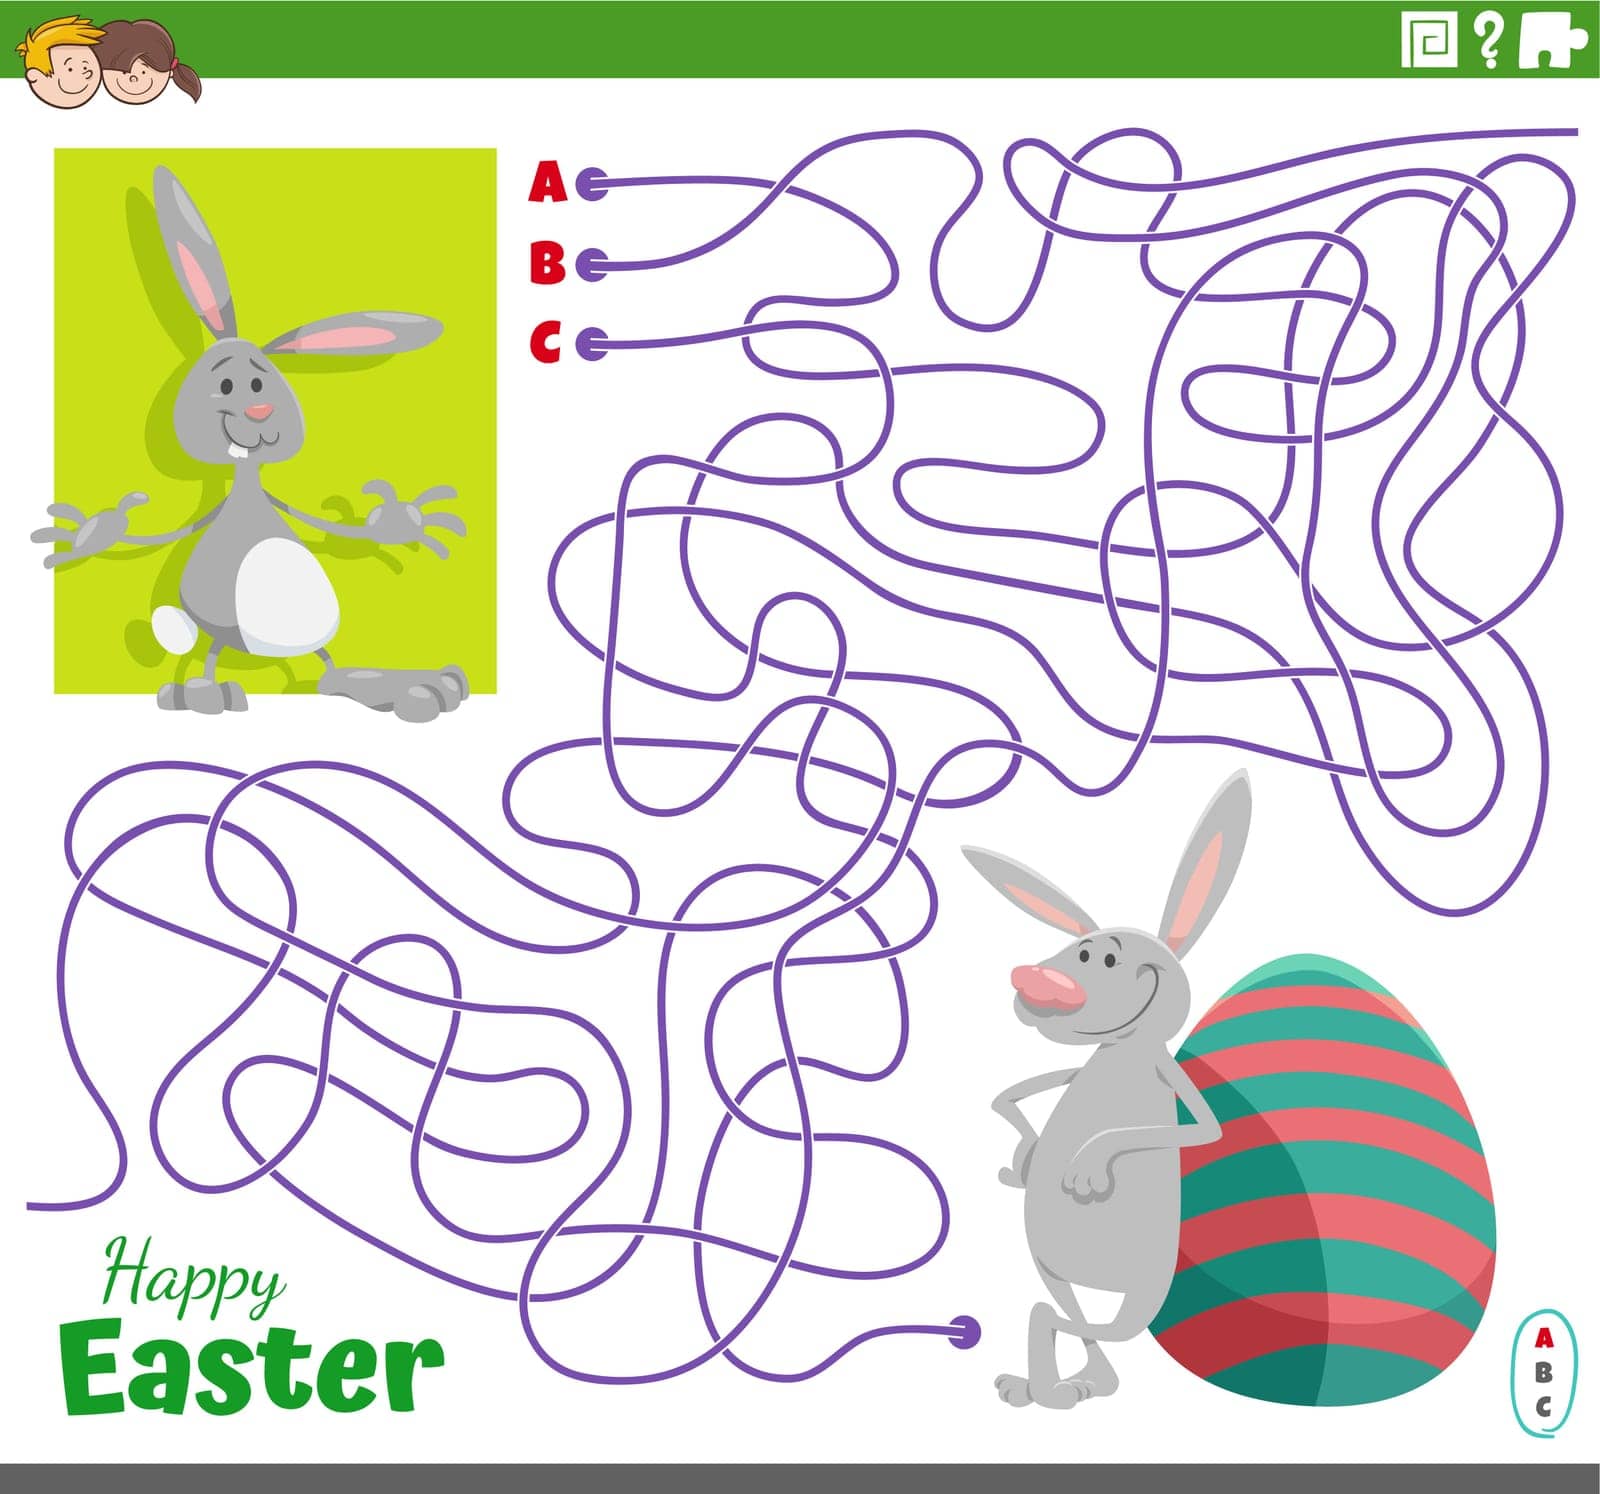 Cartoon illustration of paths maze puzzle game with Easter Bunny hatching from Easter egg